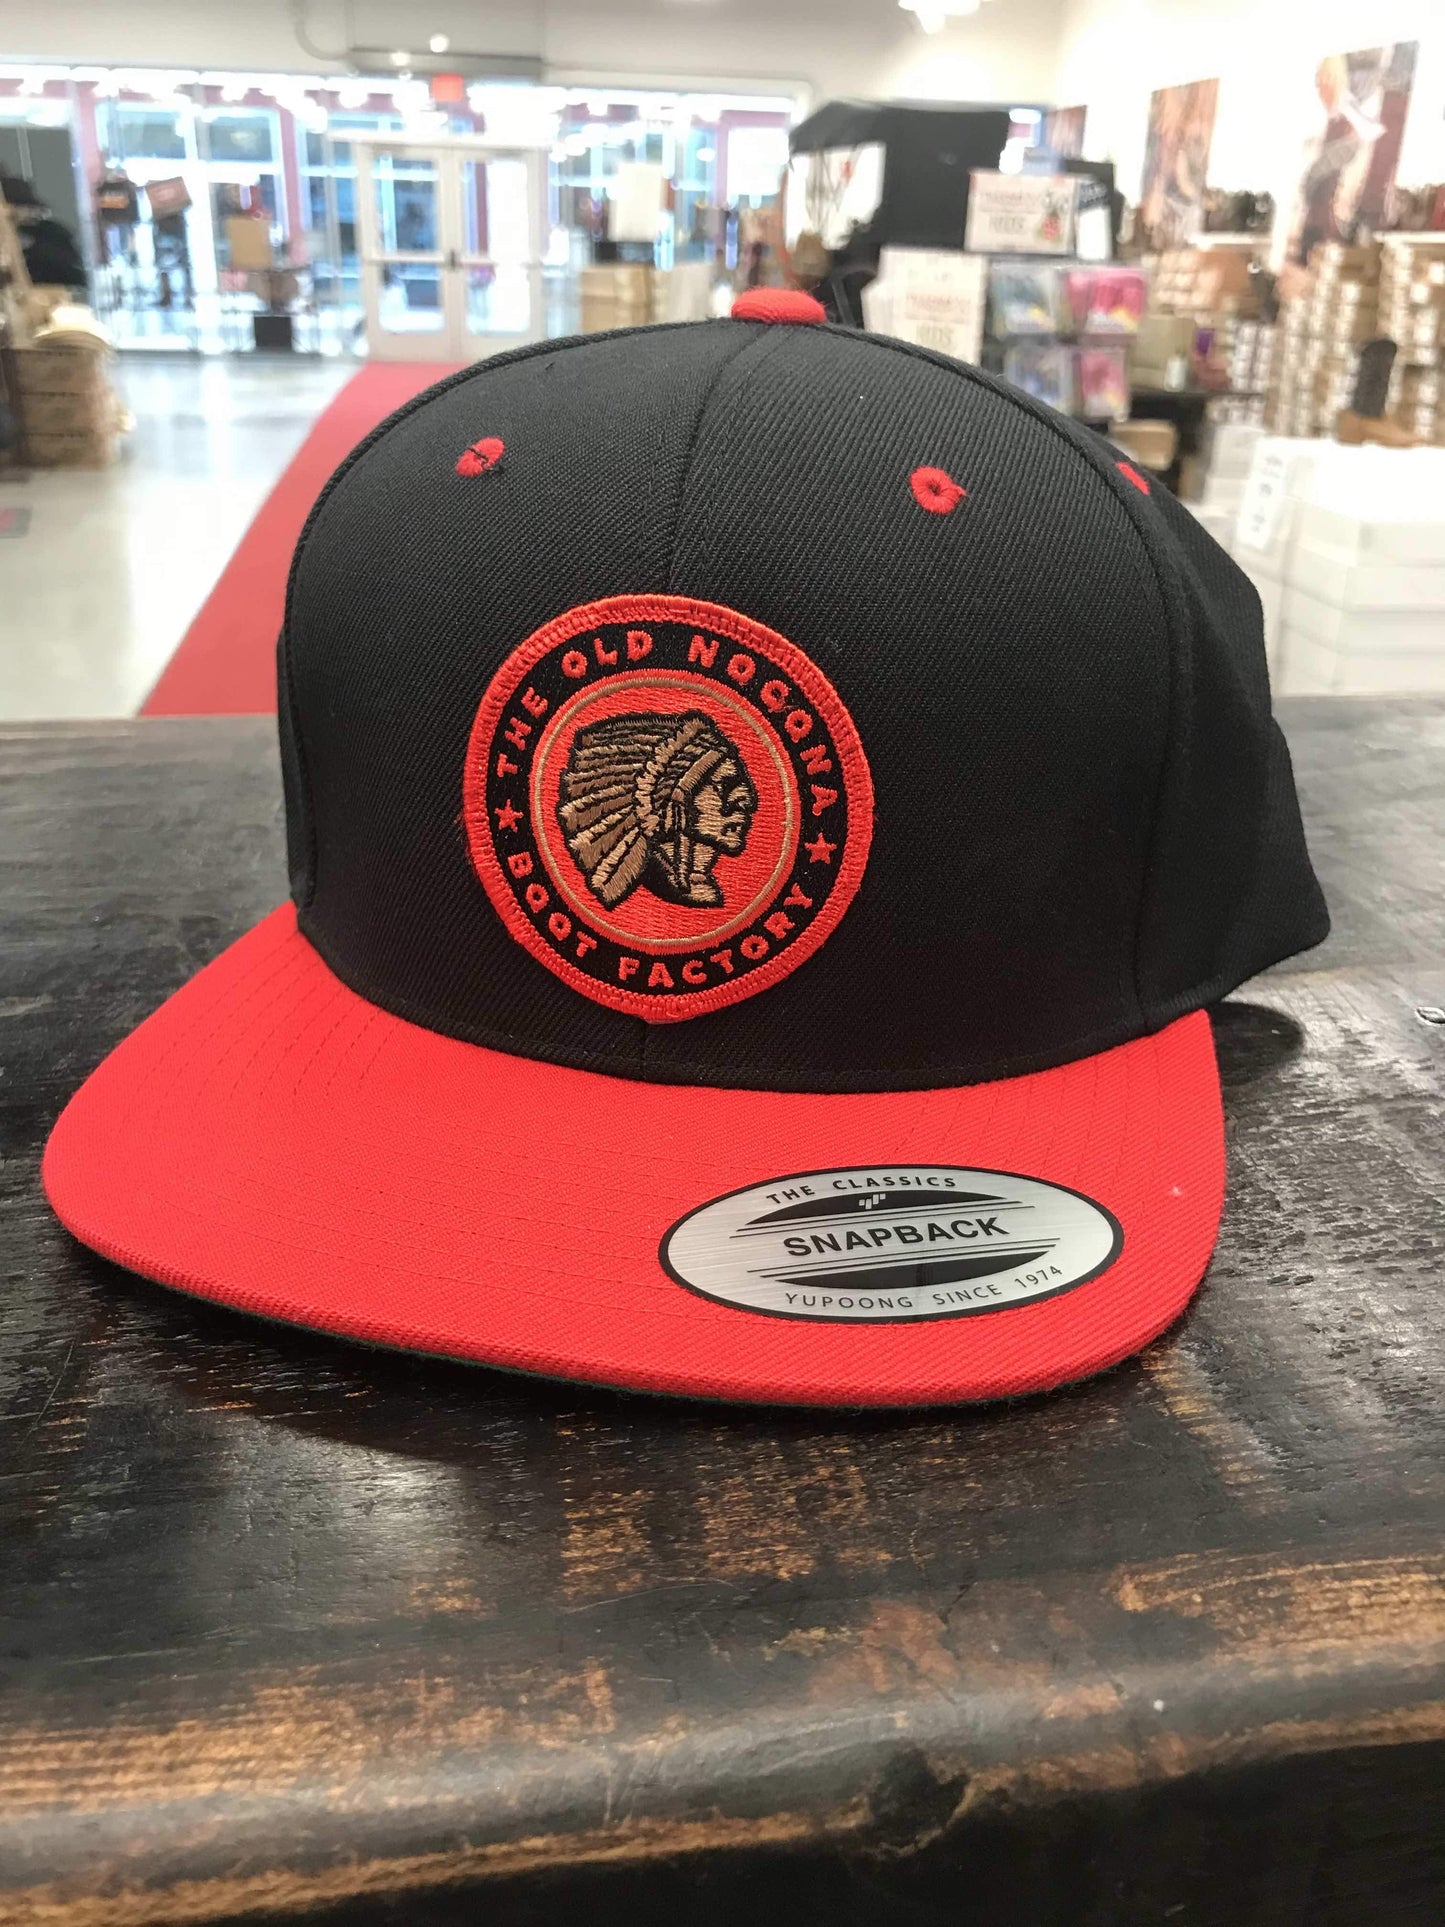 ONC2020 The Old Nocona Boot Factory Caps - RED/BLACK LOGO BADGE Flex Fit